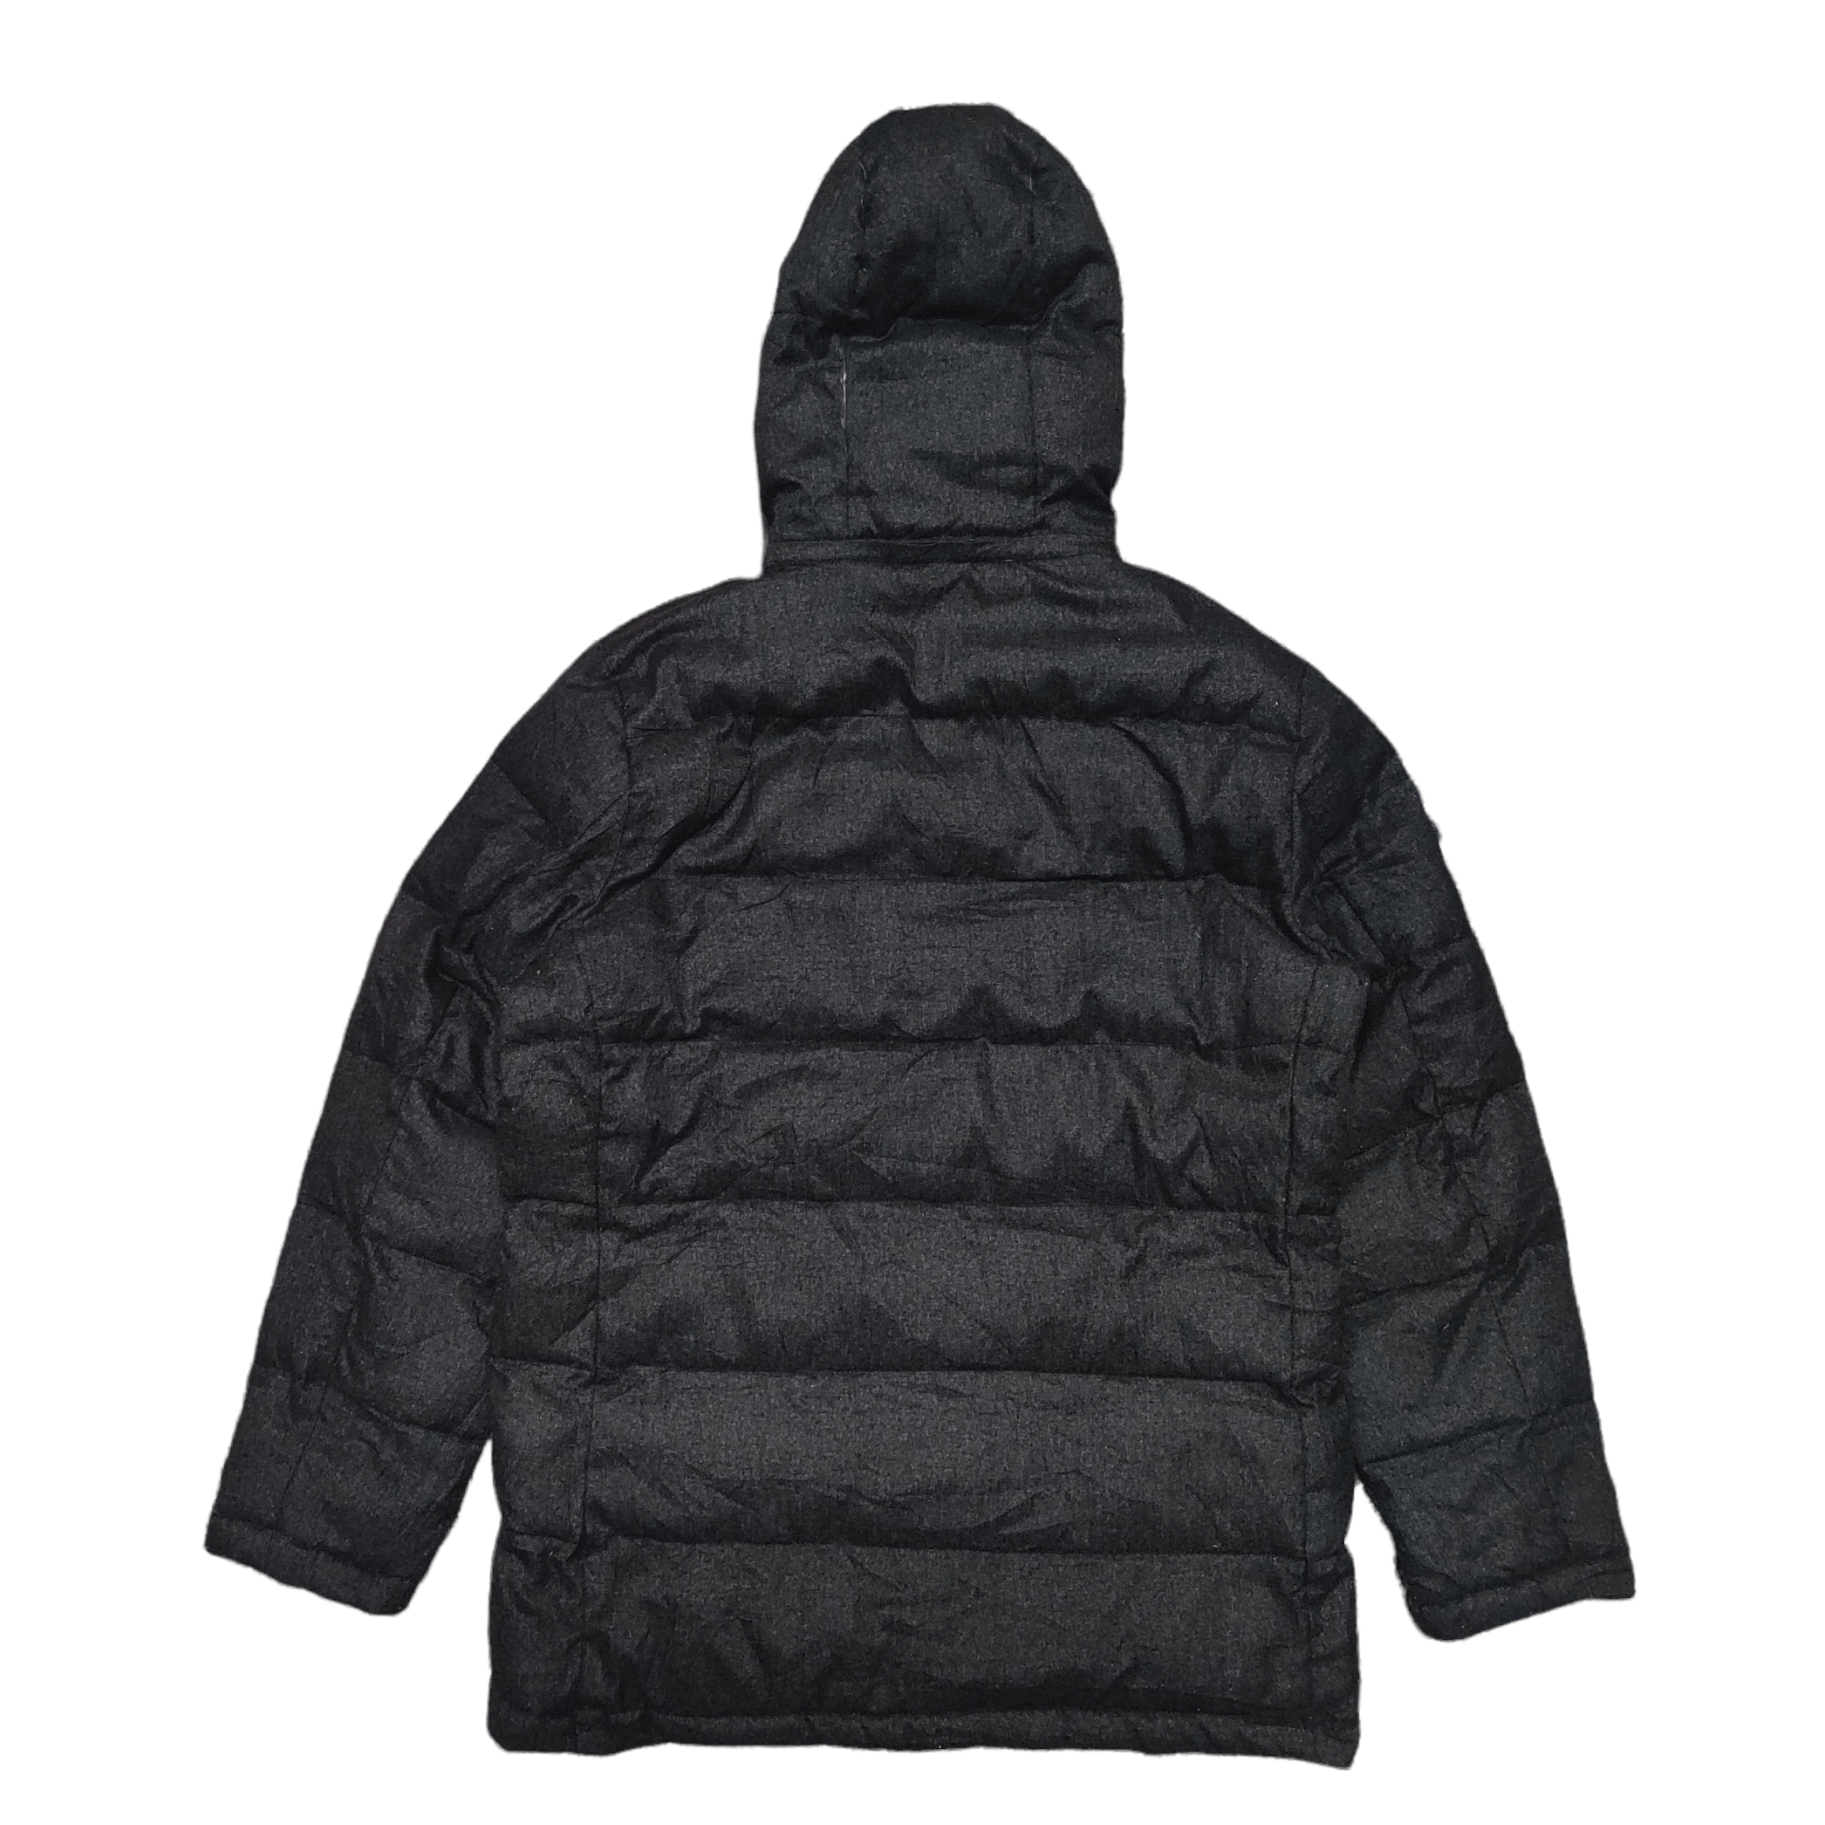 Archival Clothing - Mitsumine Puffer Down Jacket - 10